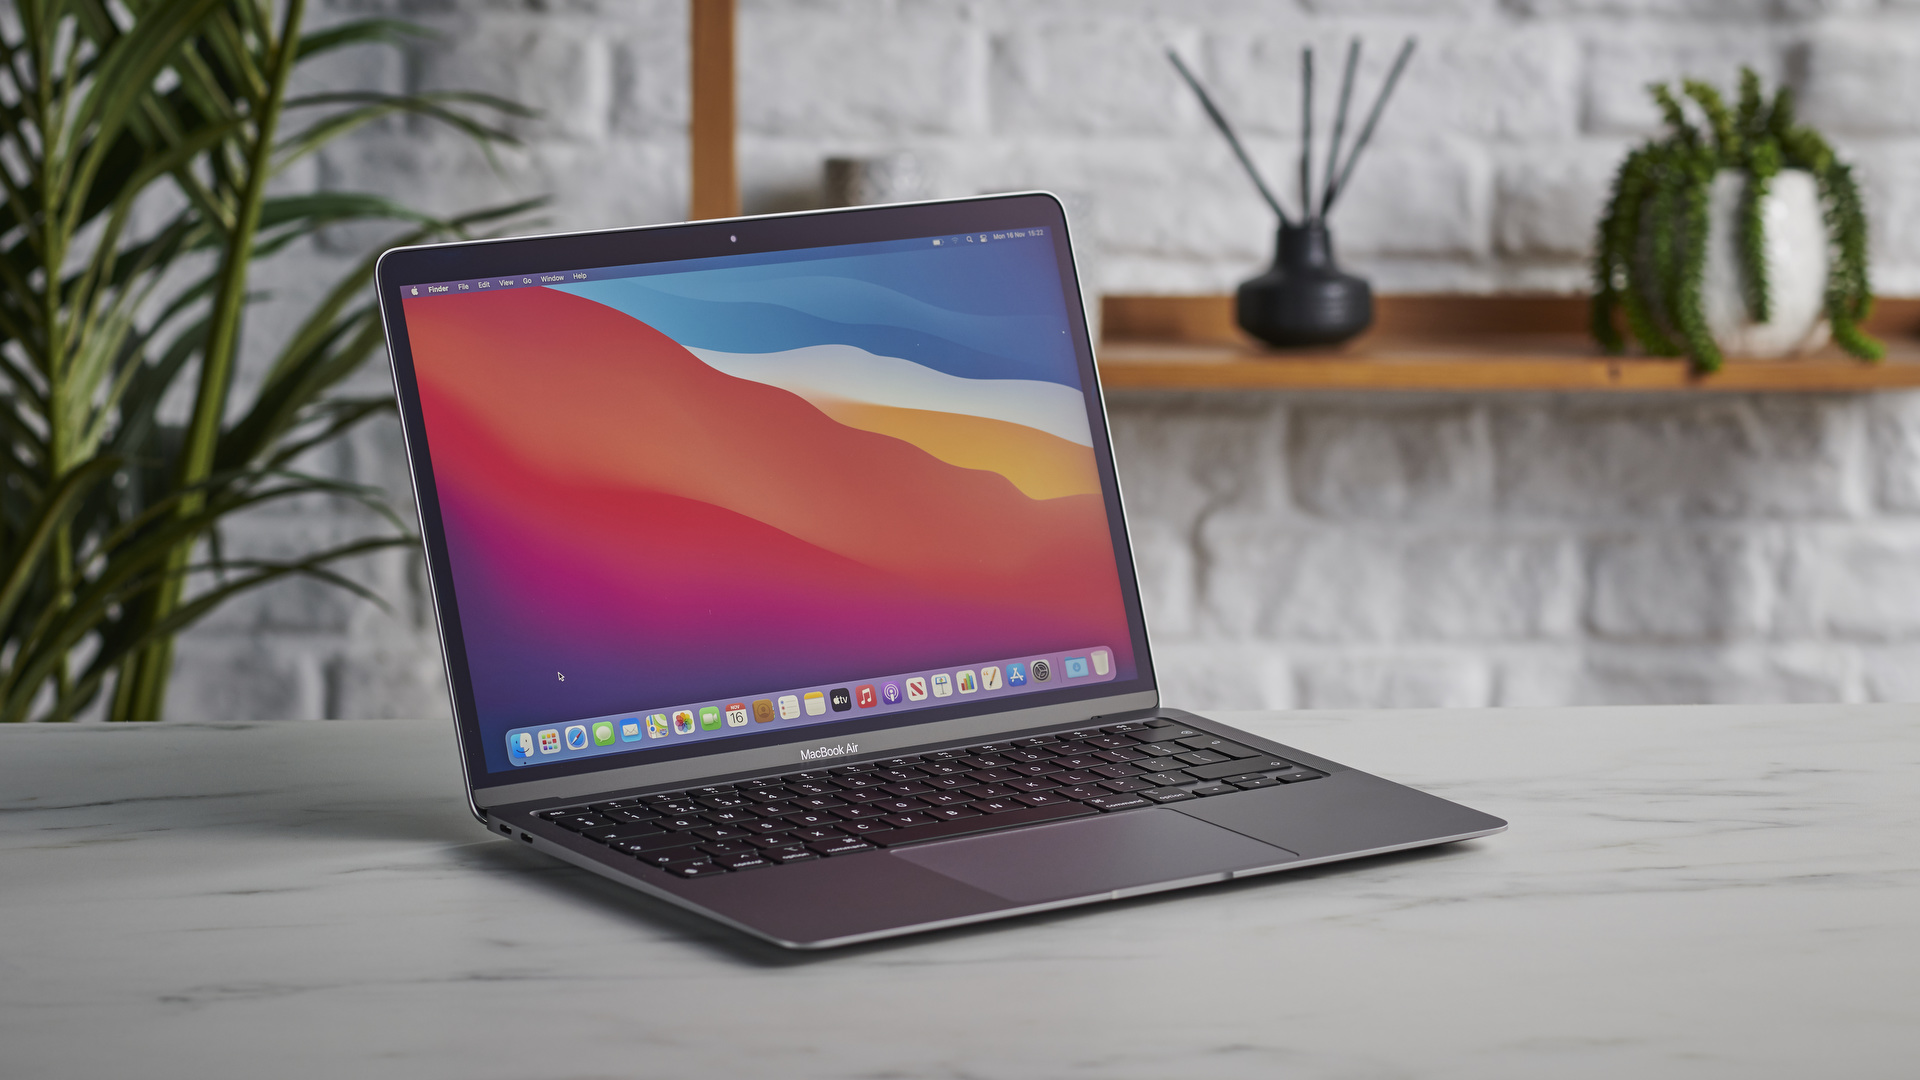 Apple macbook air 13 inch 256gb review little caprice photo